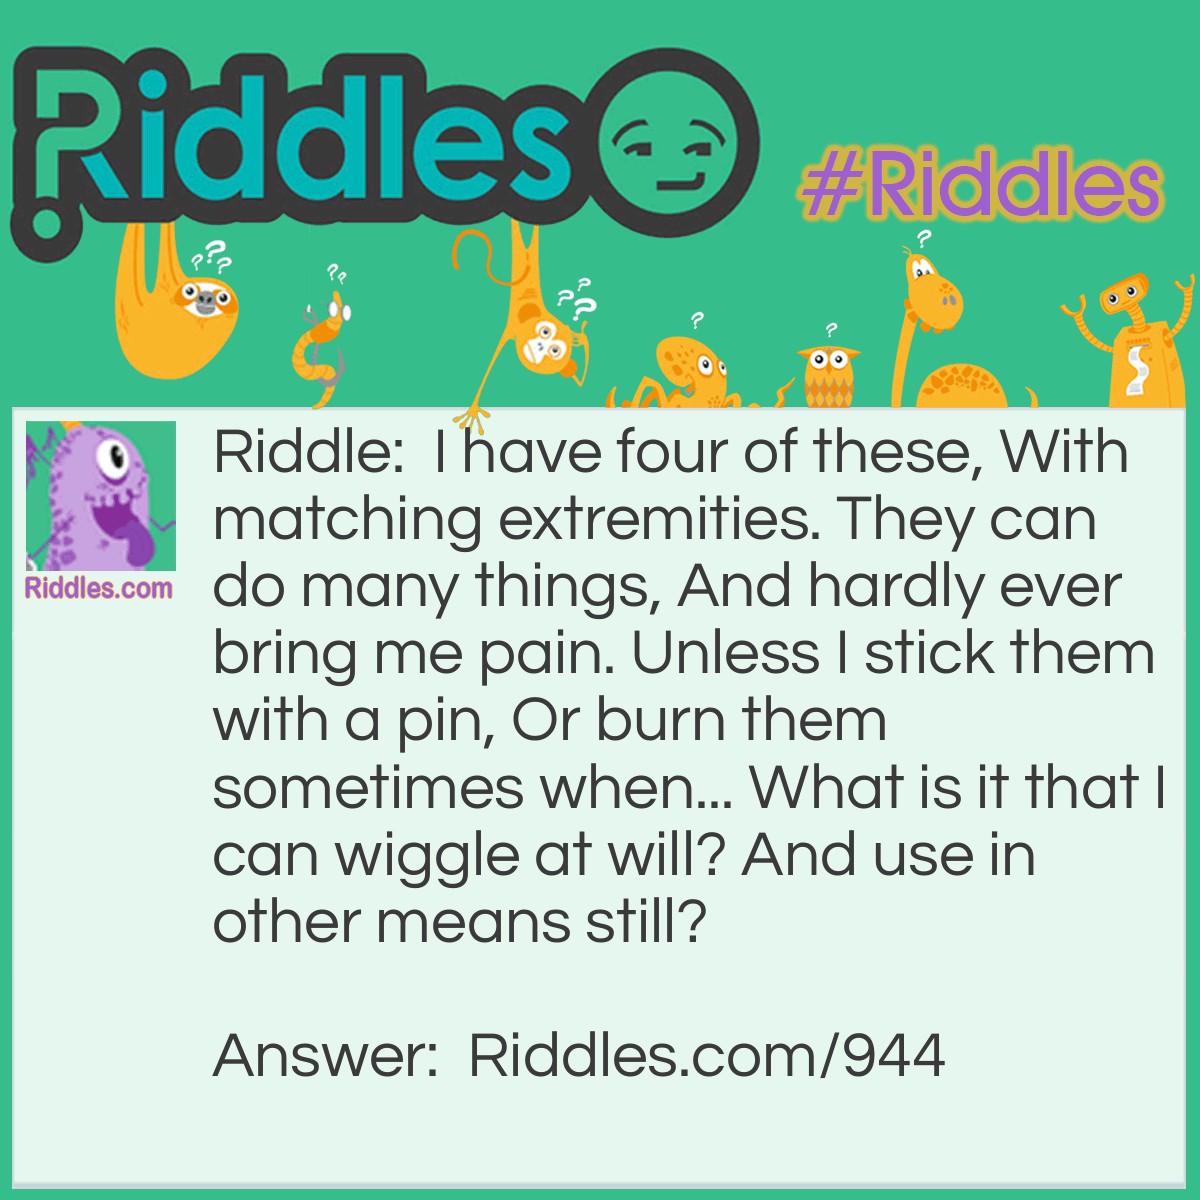 Riddle: I have four of these, With matching extremities. They can do many things, And hardly ever bring me pain. Unless I stick them with a pin, Or burn them sometimes when... What is it that I can wiggle at will? And use in other means still? Answer: Fingers.